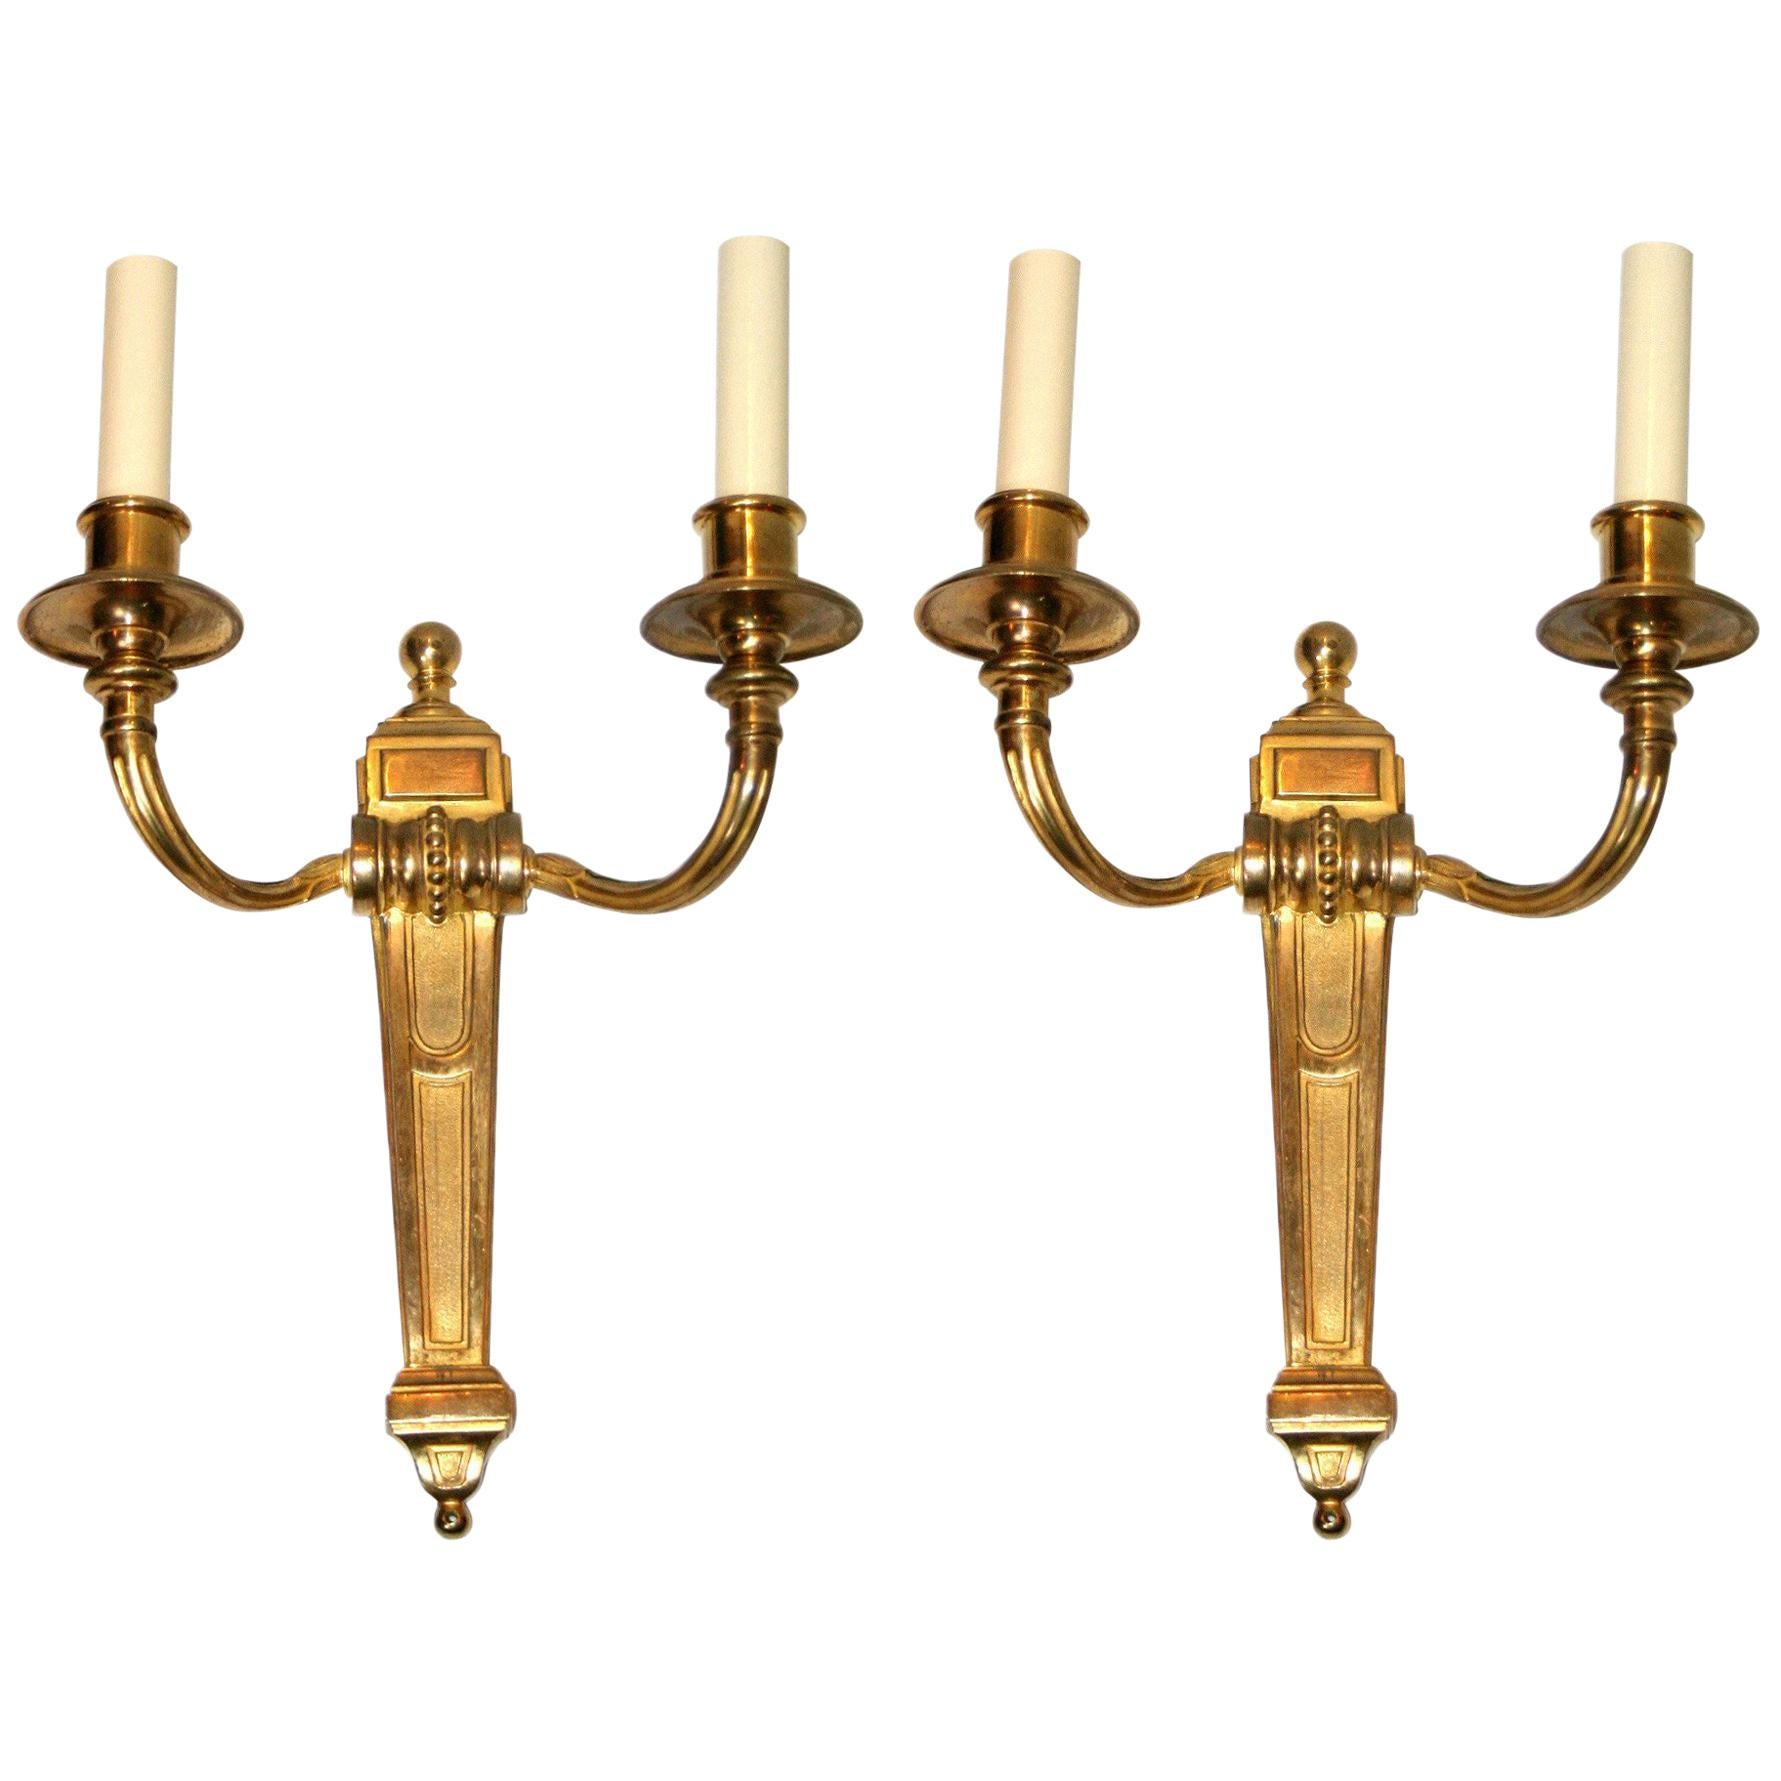 Set of Four Neoclassic Gilt Metal Sconces, Sold in Pairs